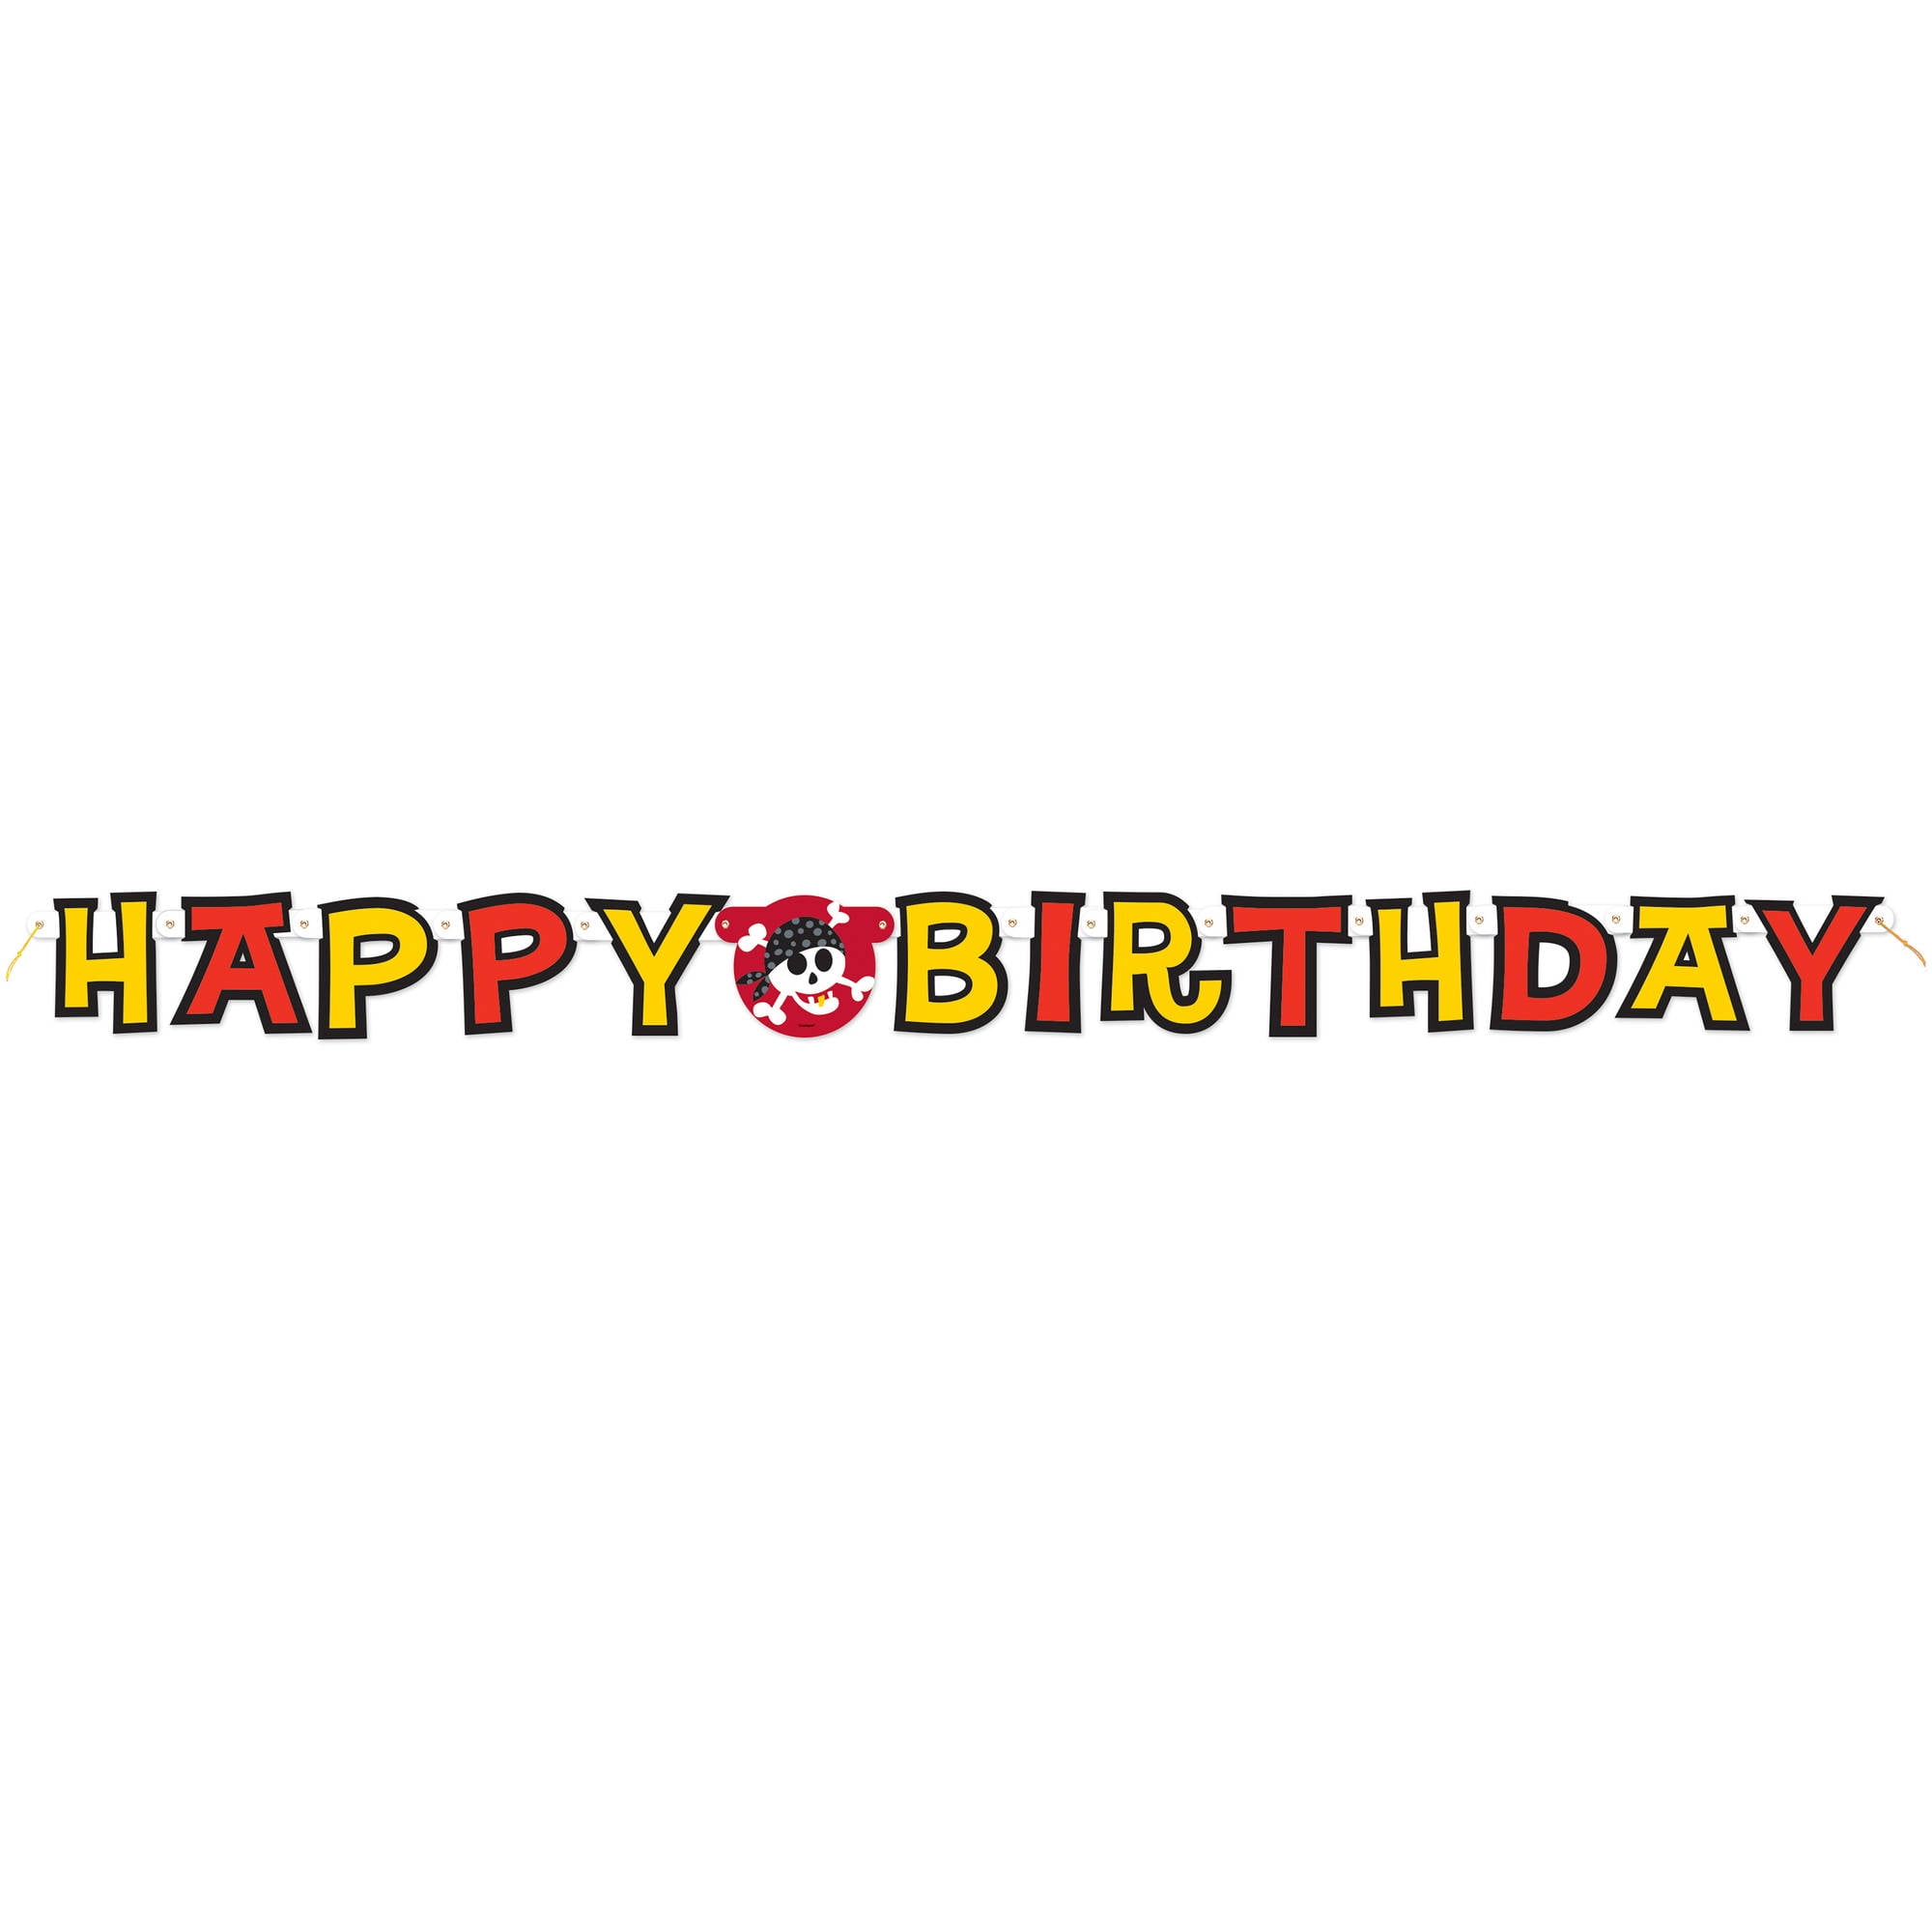 Dinosaur Themed Jointed Birthday Banner 5.5 feet by Creative Converting Wal-mart Inc.